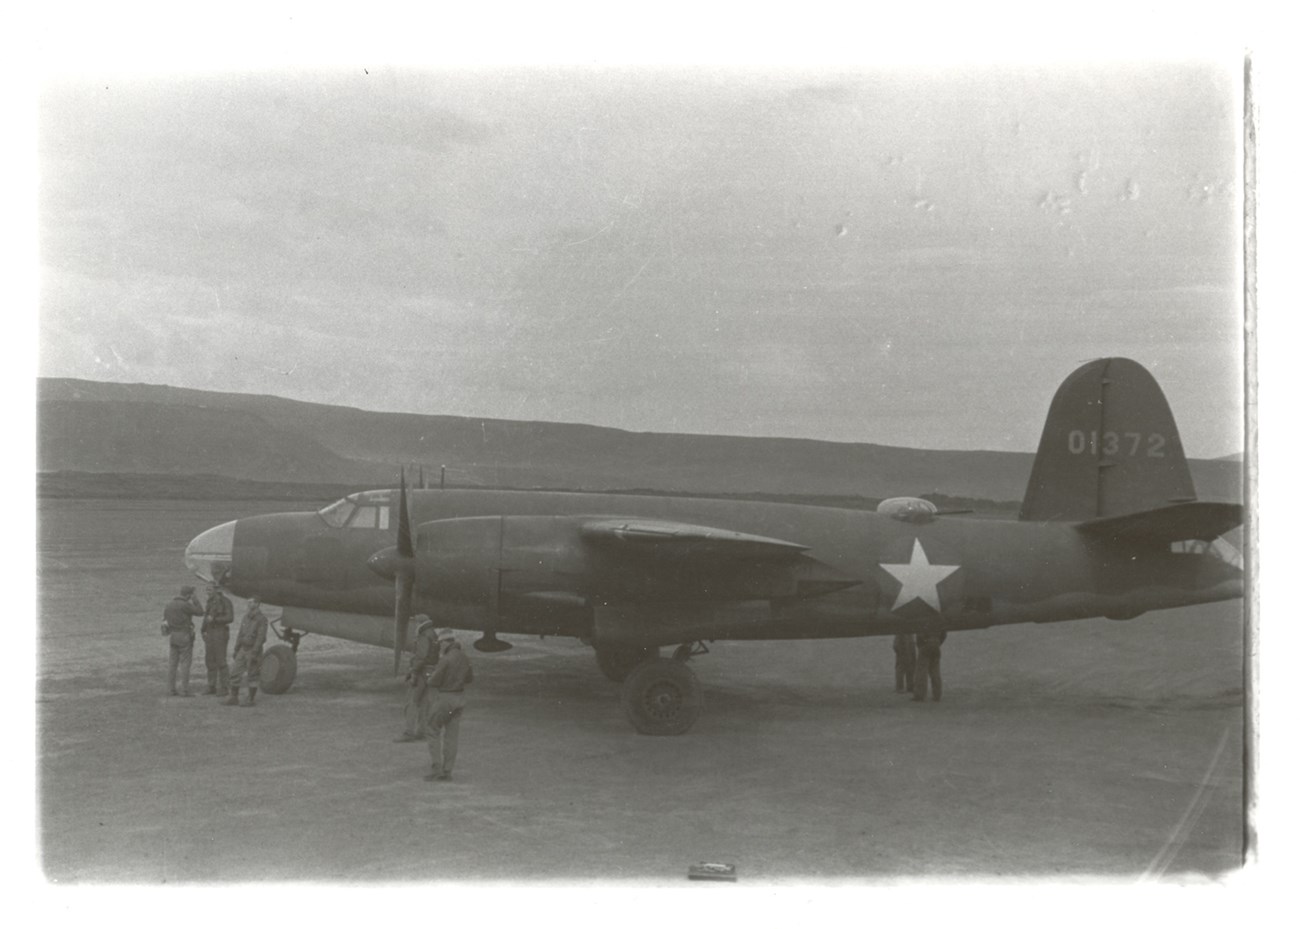 Side view of a plane with tail number, star on side, and people near the front propellers.